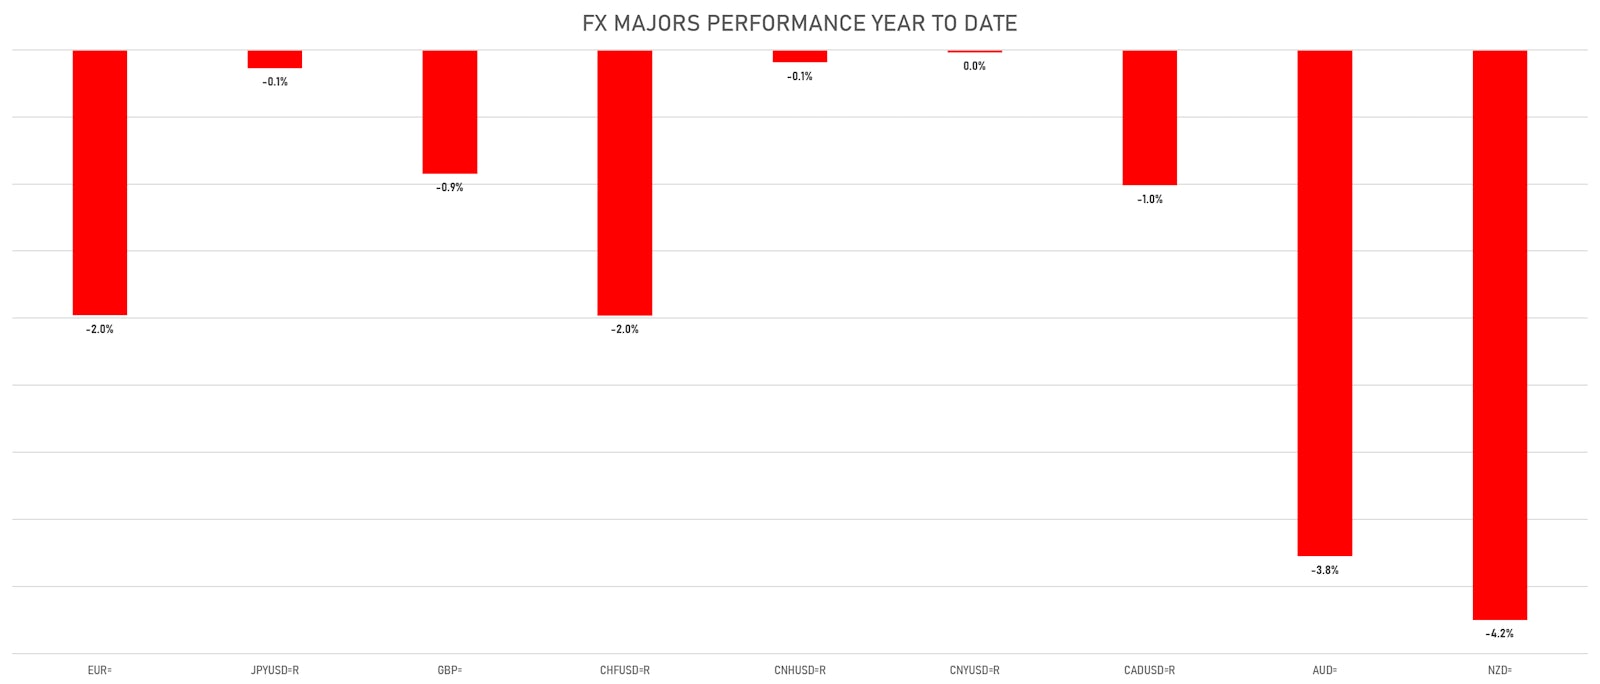 FX Majors Performance Year To Date | Sources: ϕpost, Refinitiv data